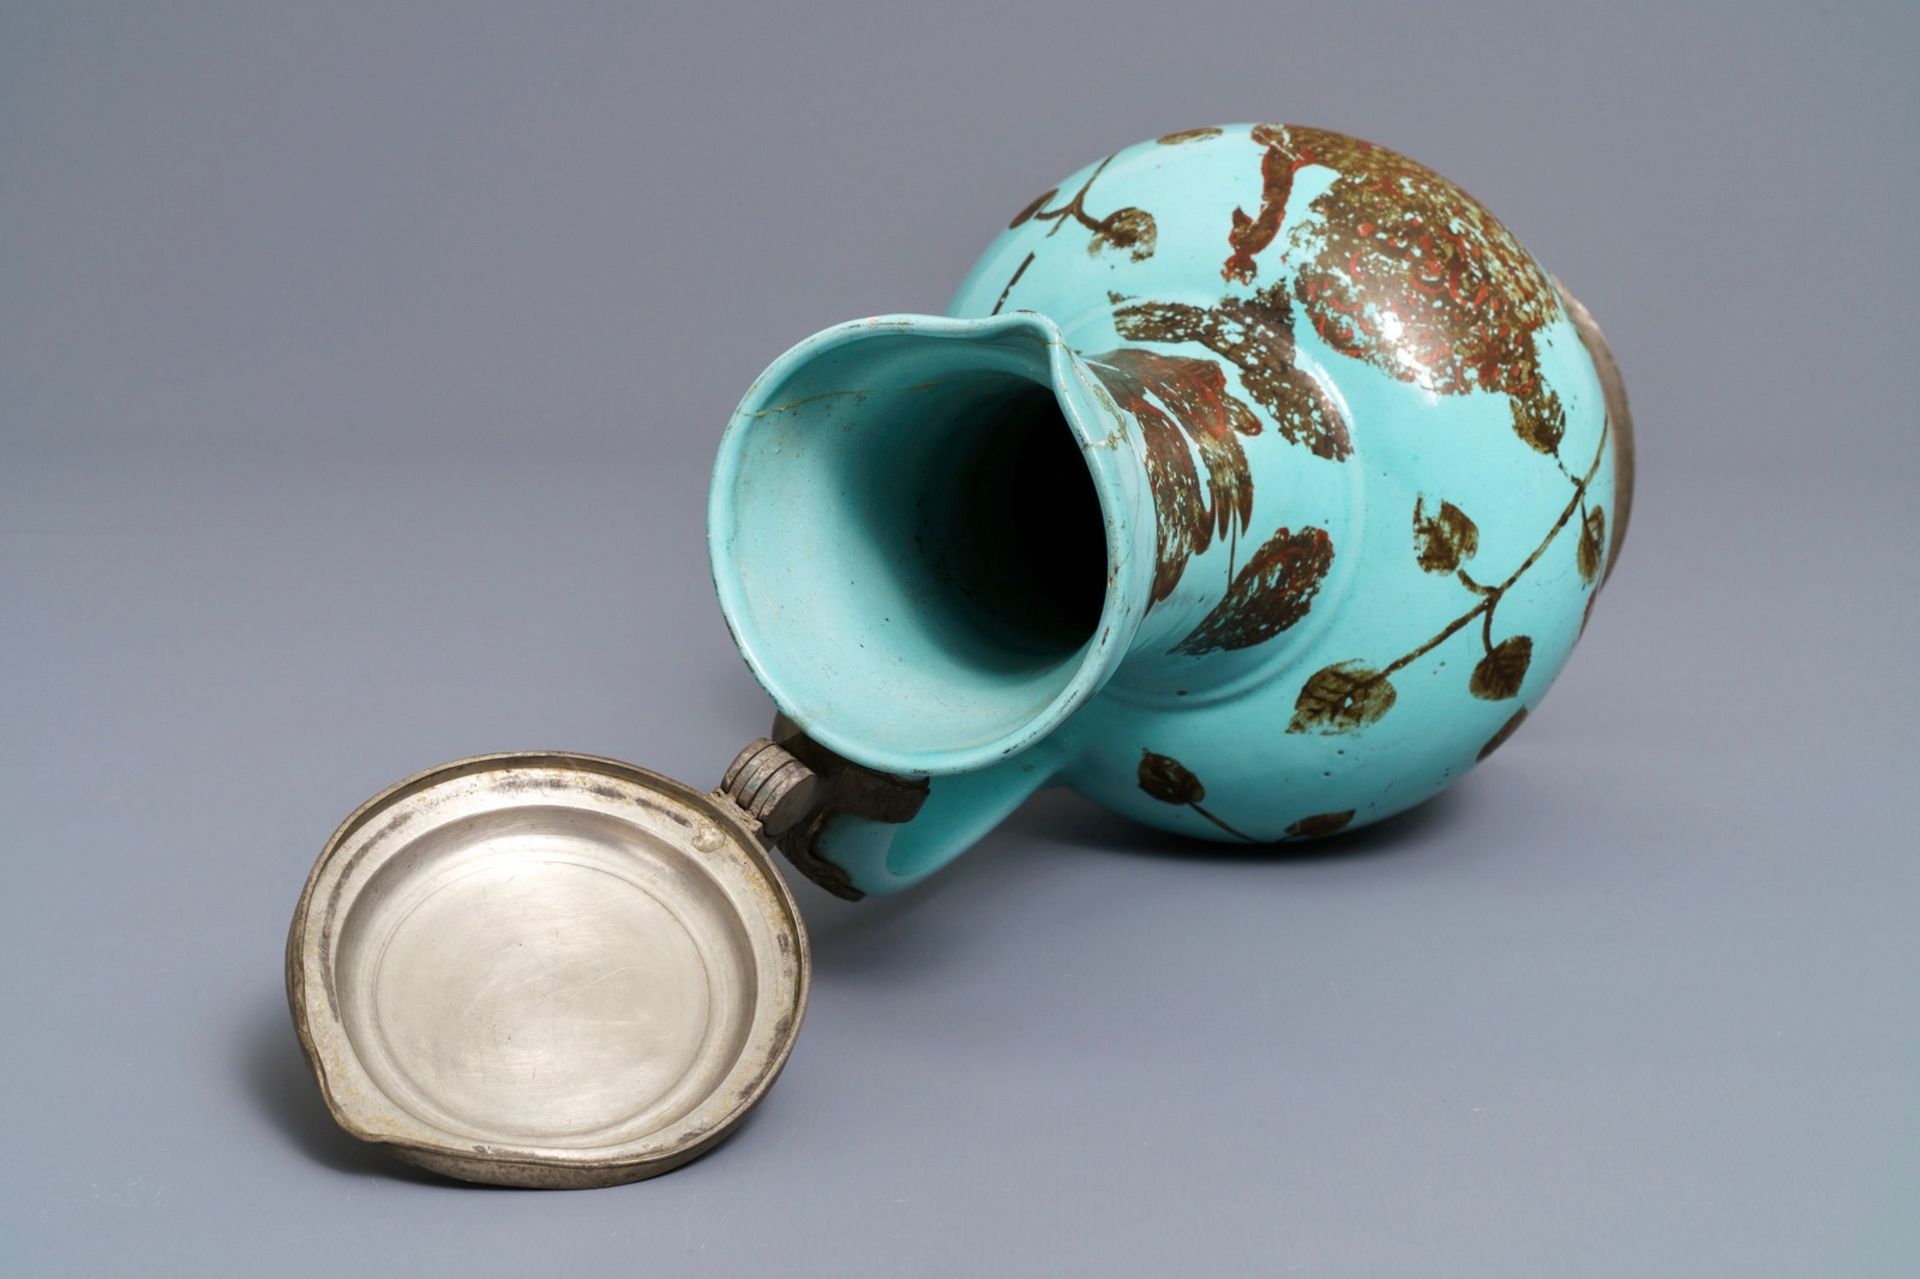 A German pewter-mounted turquoise ground ewer with birds among flowers, 17/18th C. - Image 8 of 8